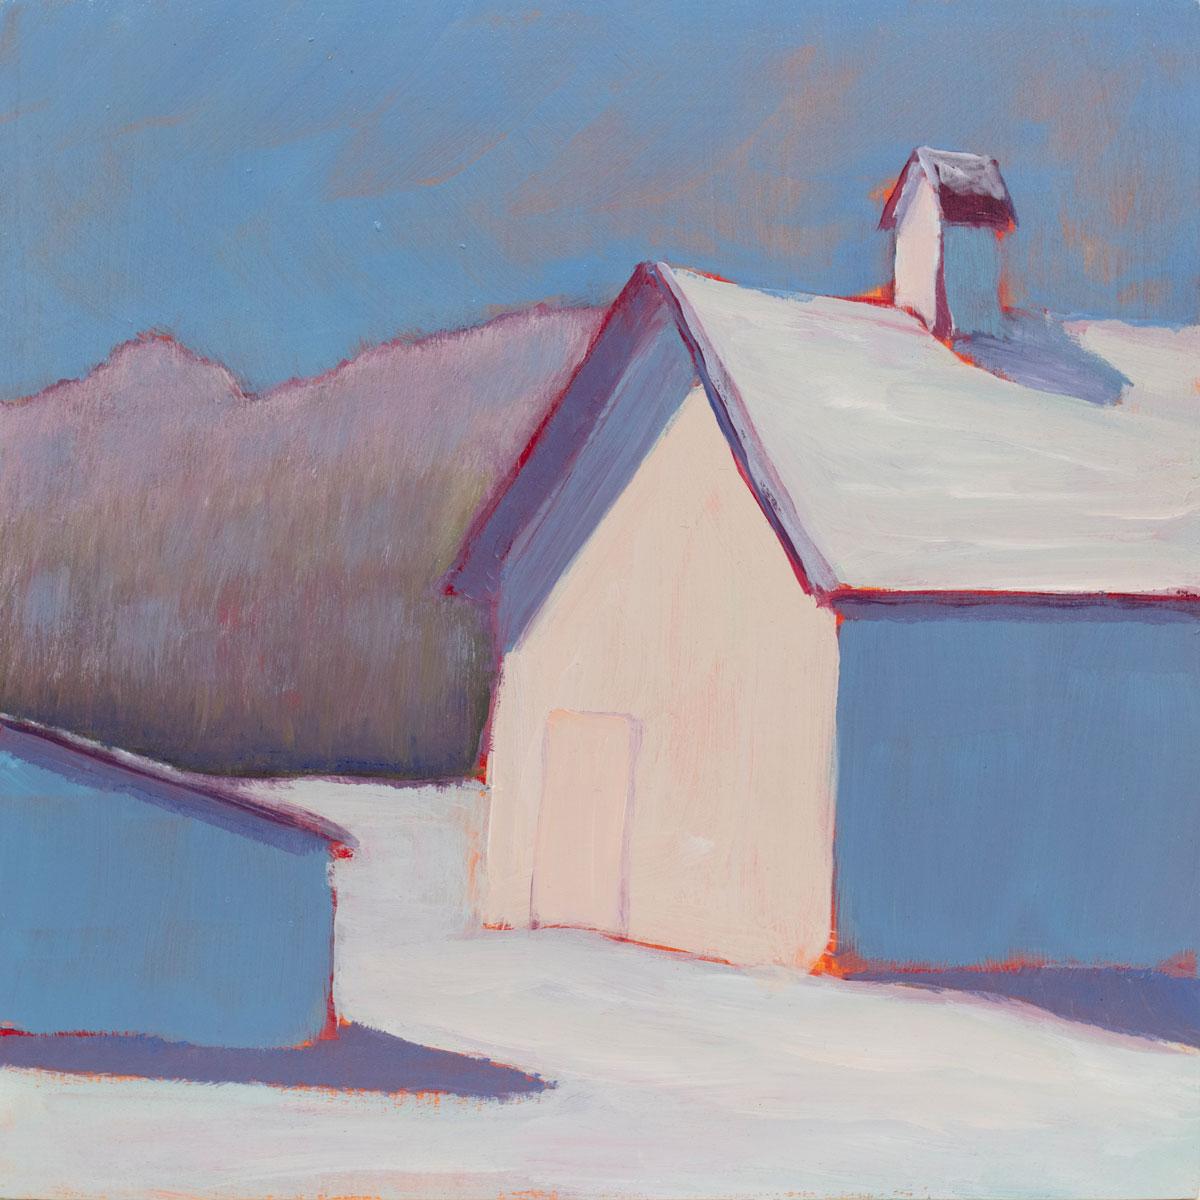 This small contemporary winter landscape painting by Carol Young features an abstracted scene of a barn in the snow.  The painting is broken into simplified planes of color with cool, blue, lavender and white tones contrasted by warm cream and red,